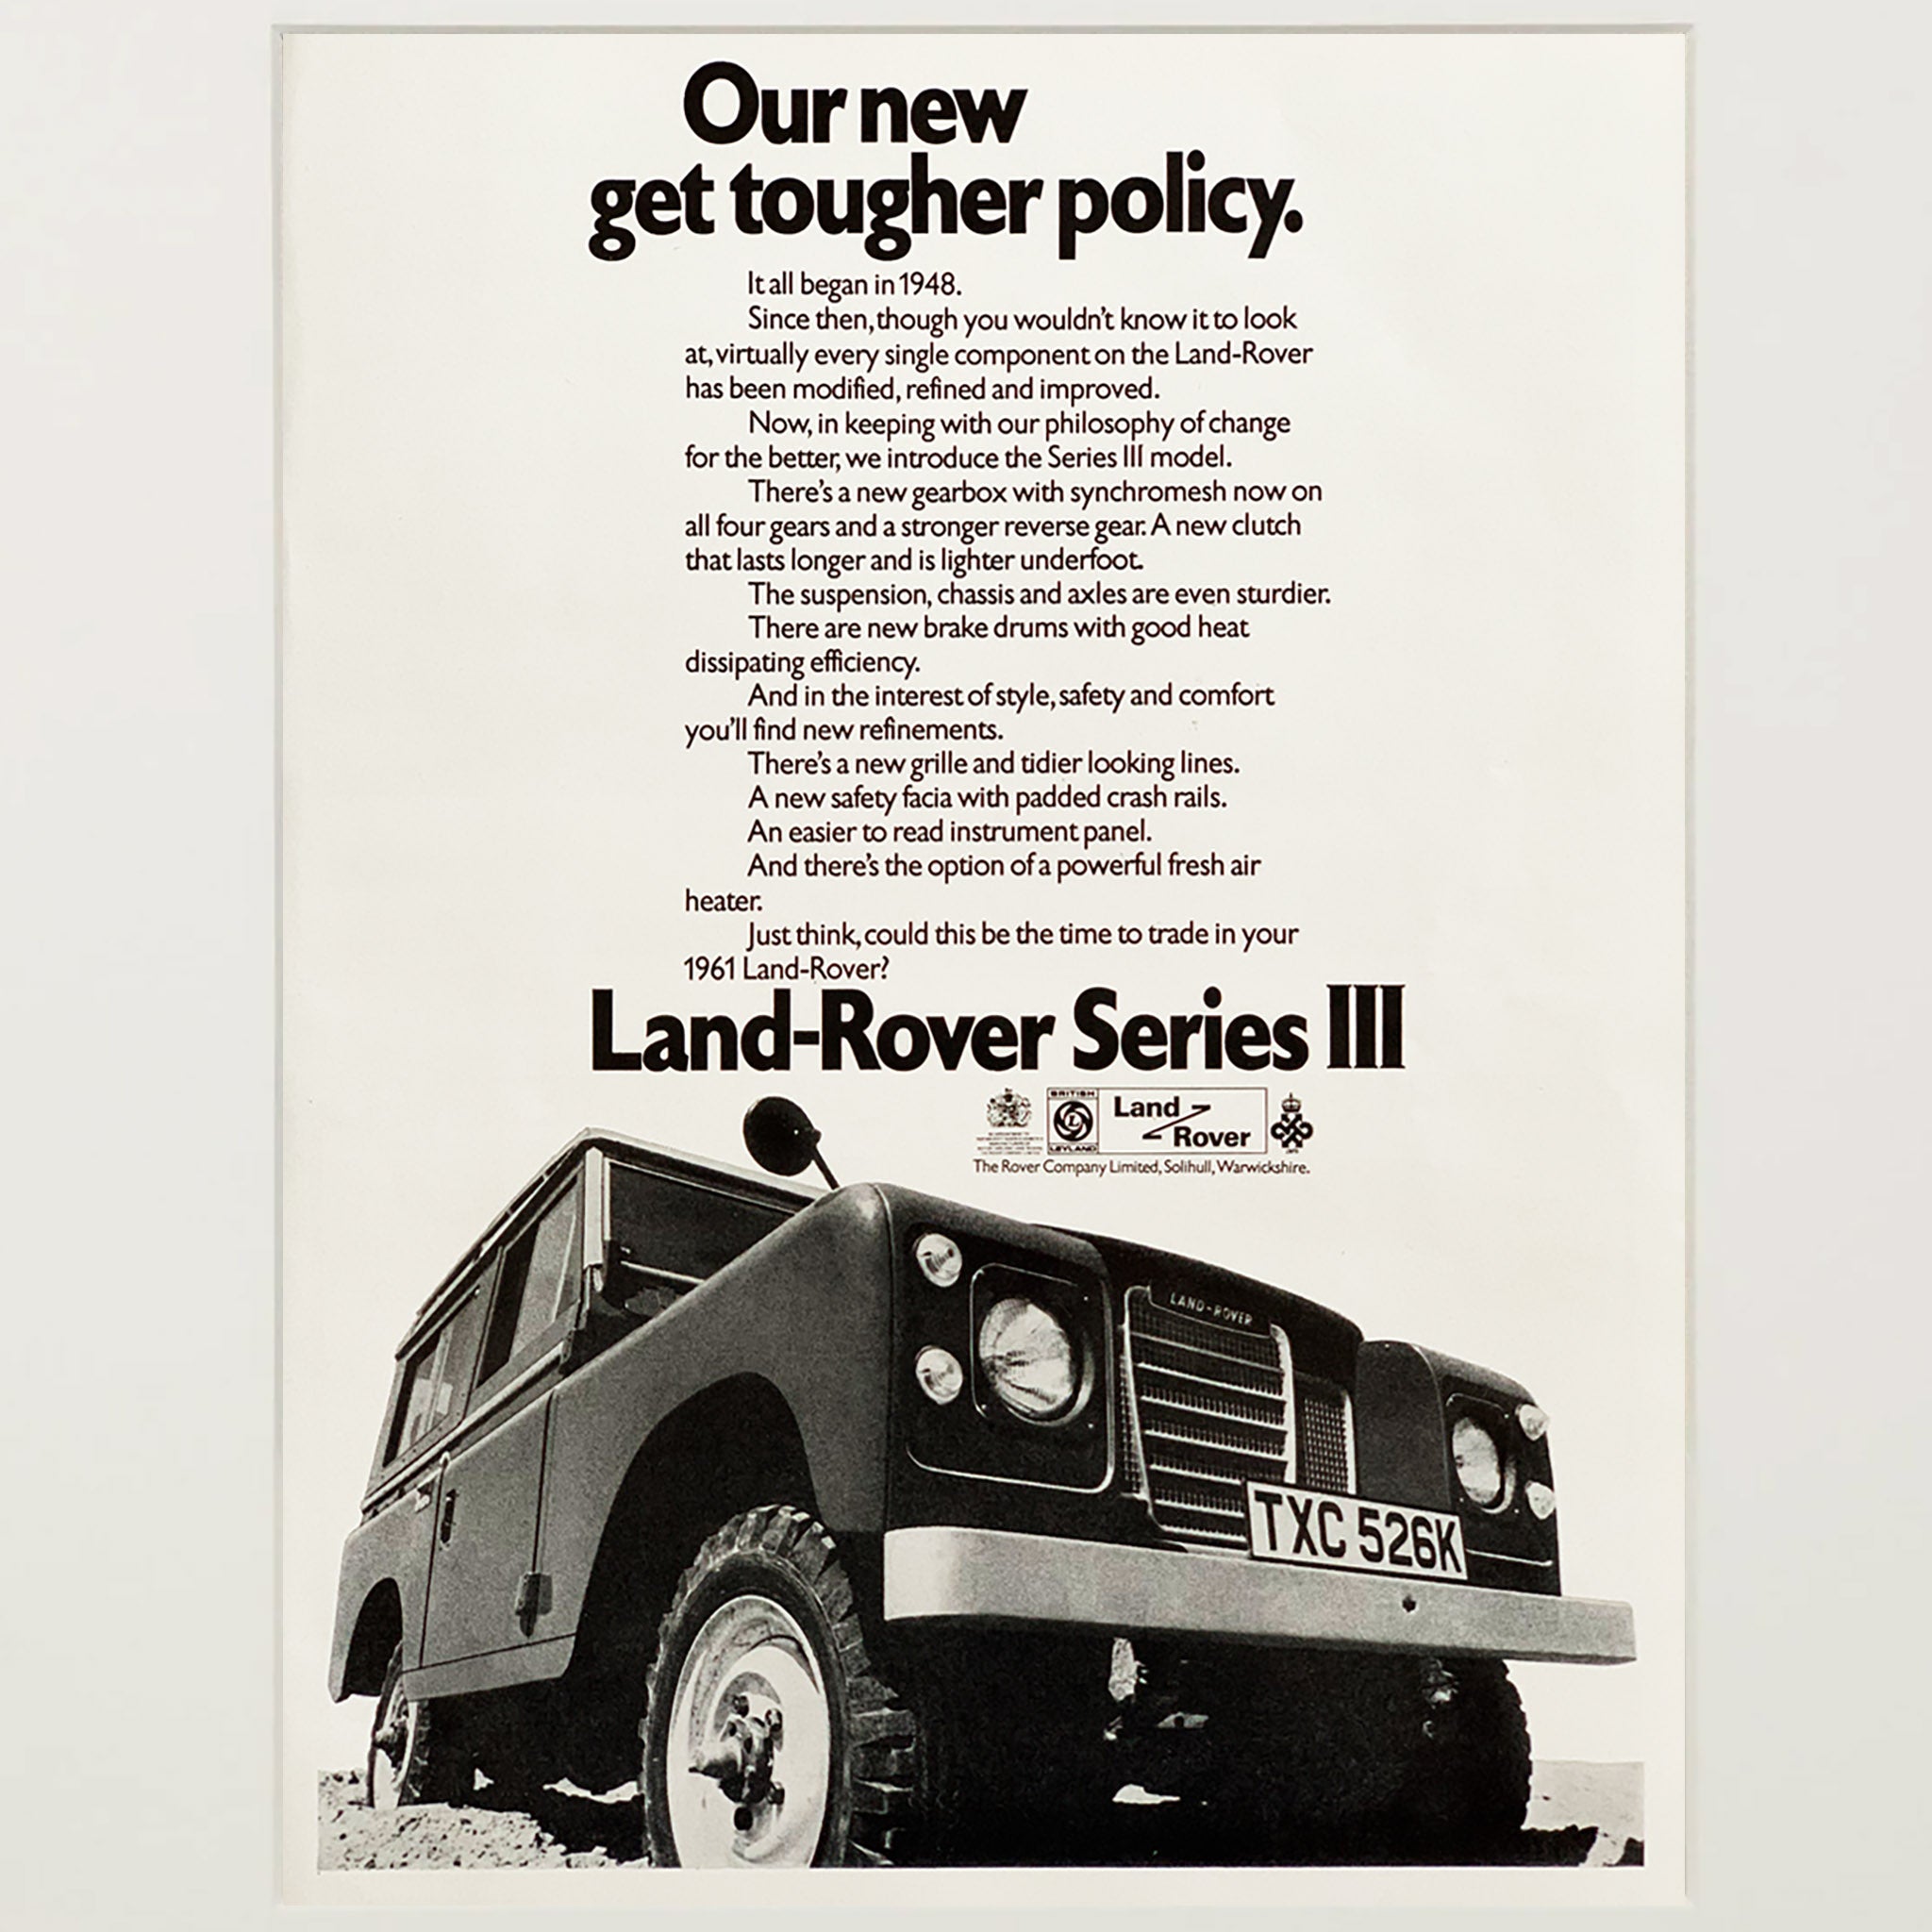 Framed Land Rover New Get Tougher Policy Advertisement